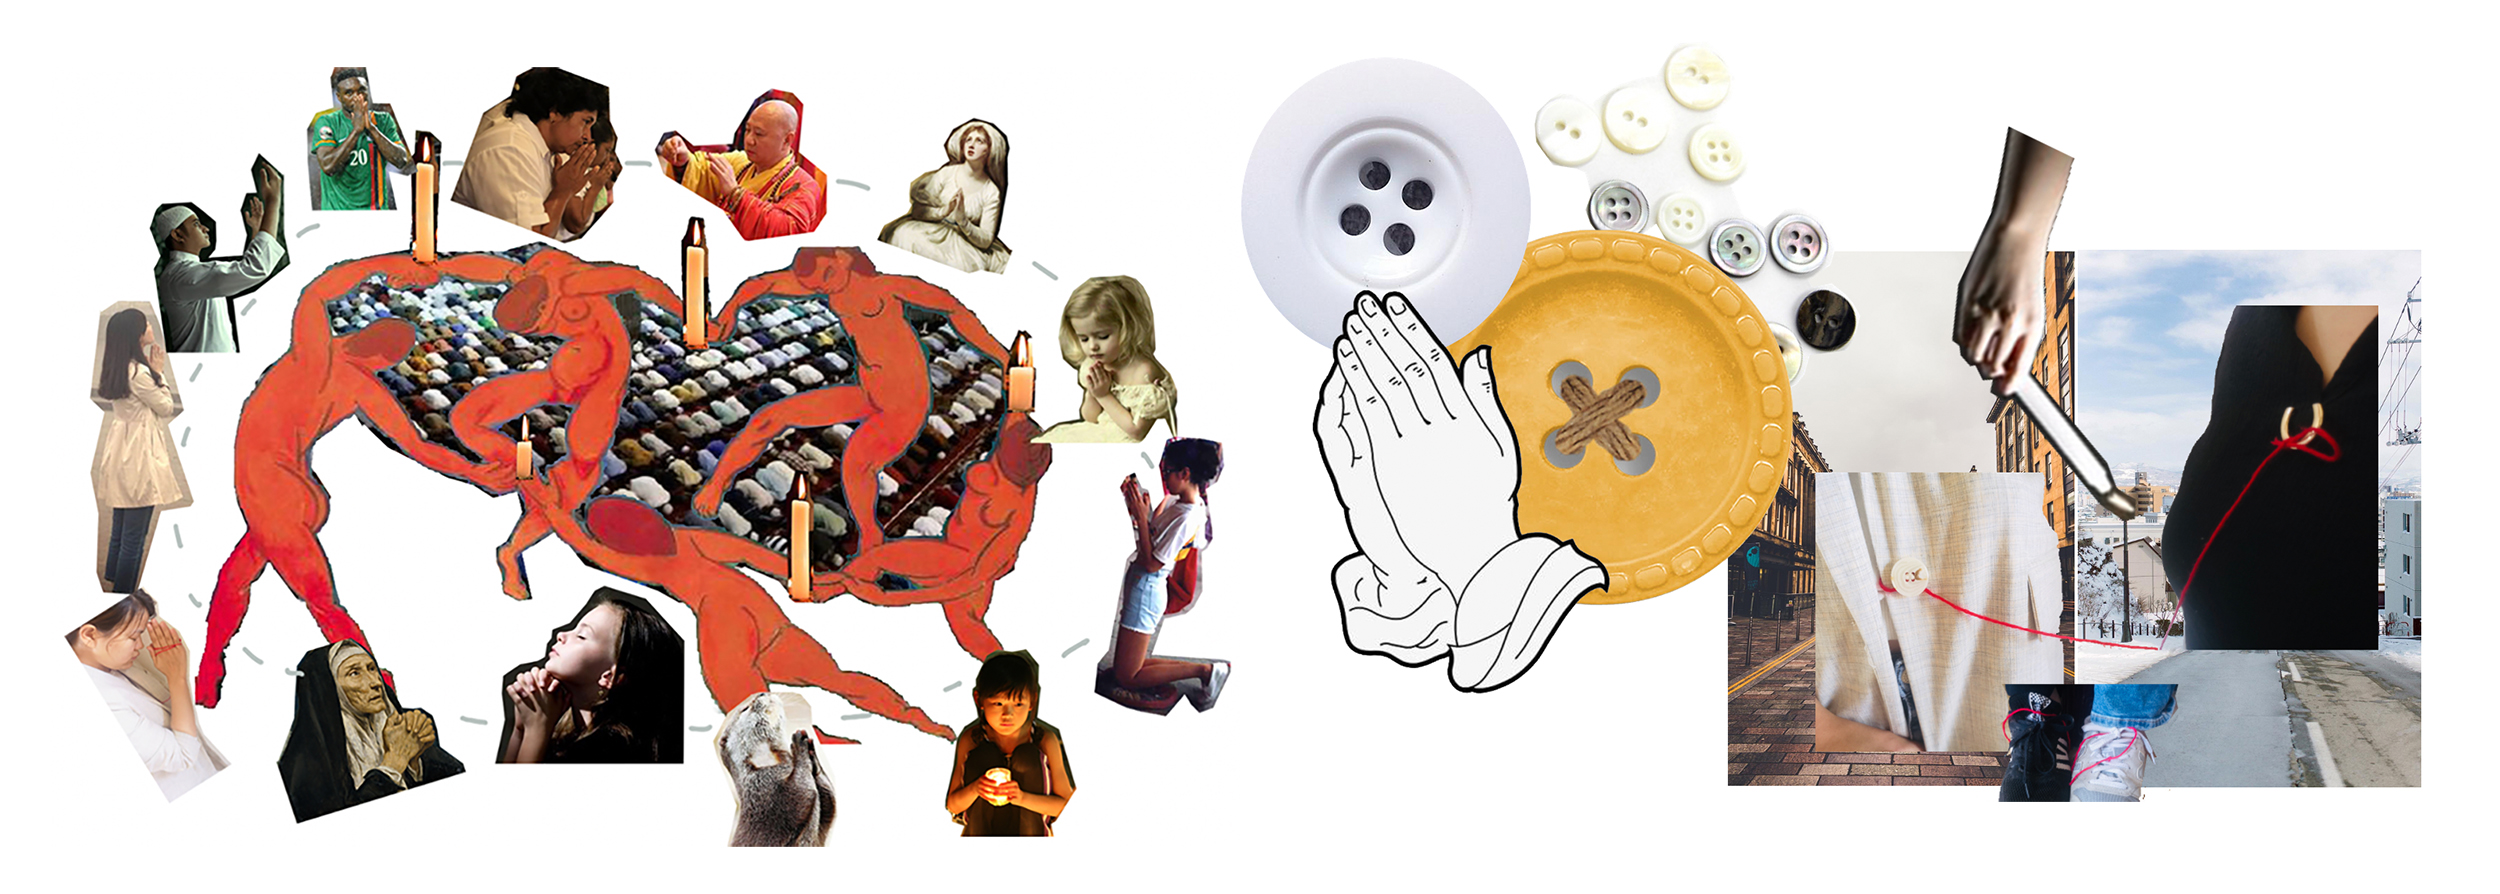 Illustrations and mood board of people praying